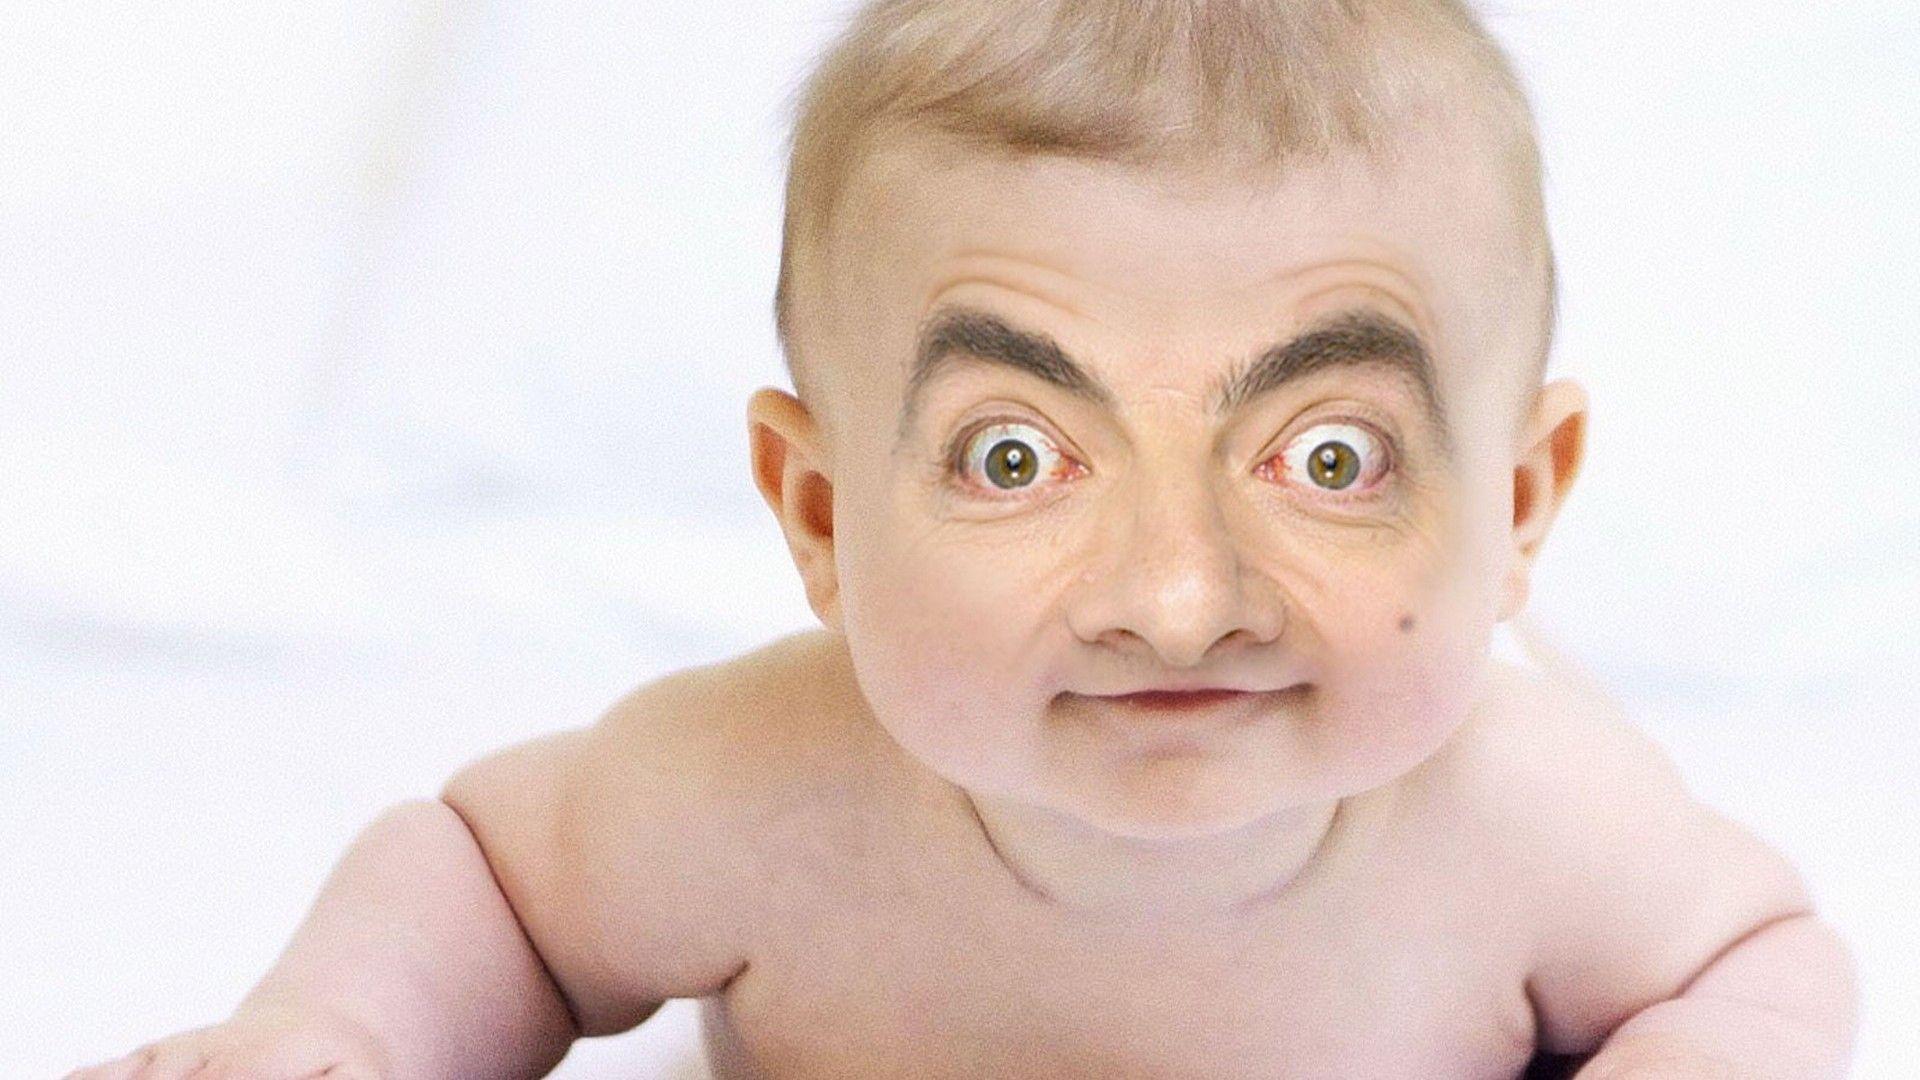 funny image of baby mr bean wallpaper - Image And Wallpaper